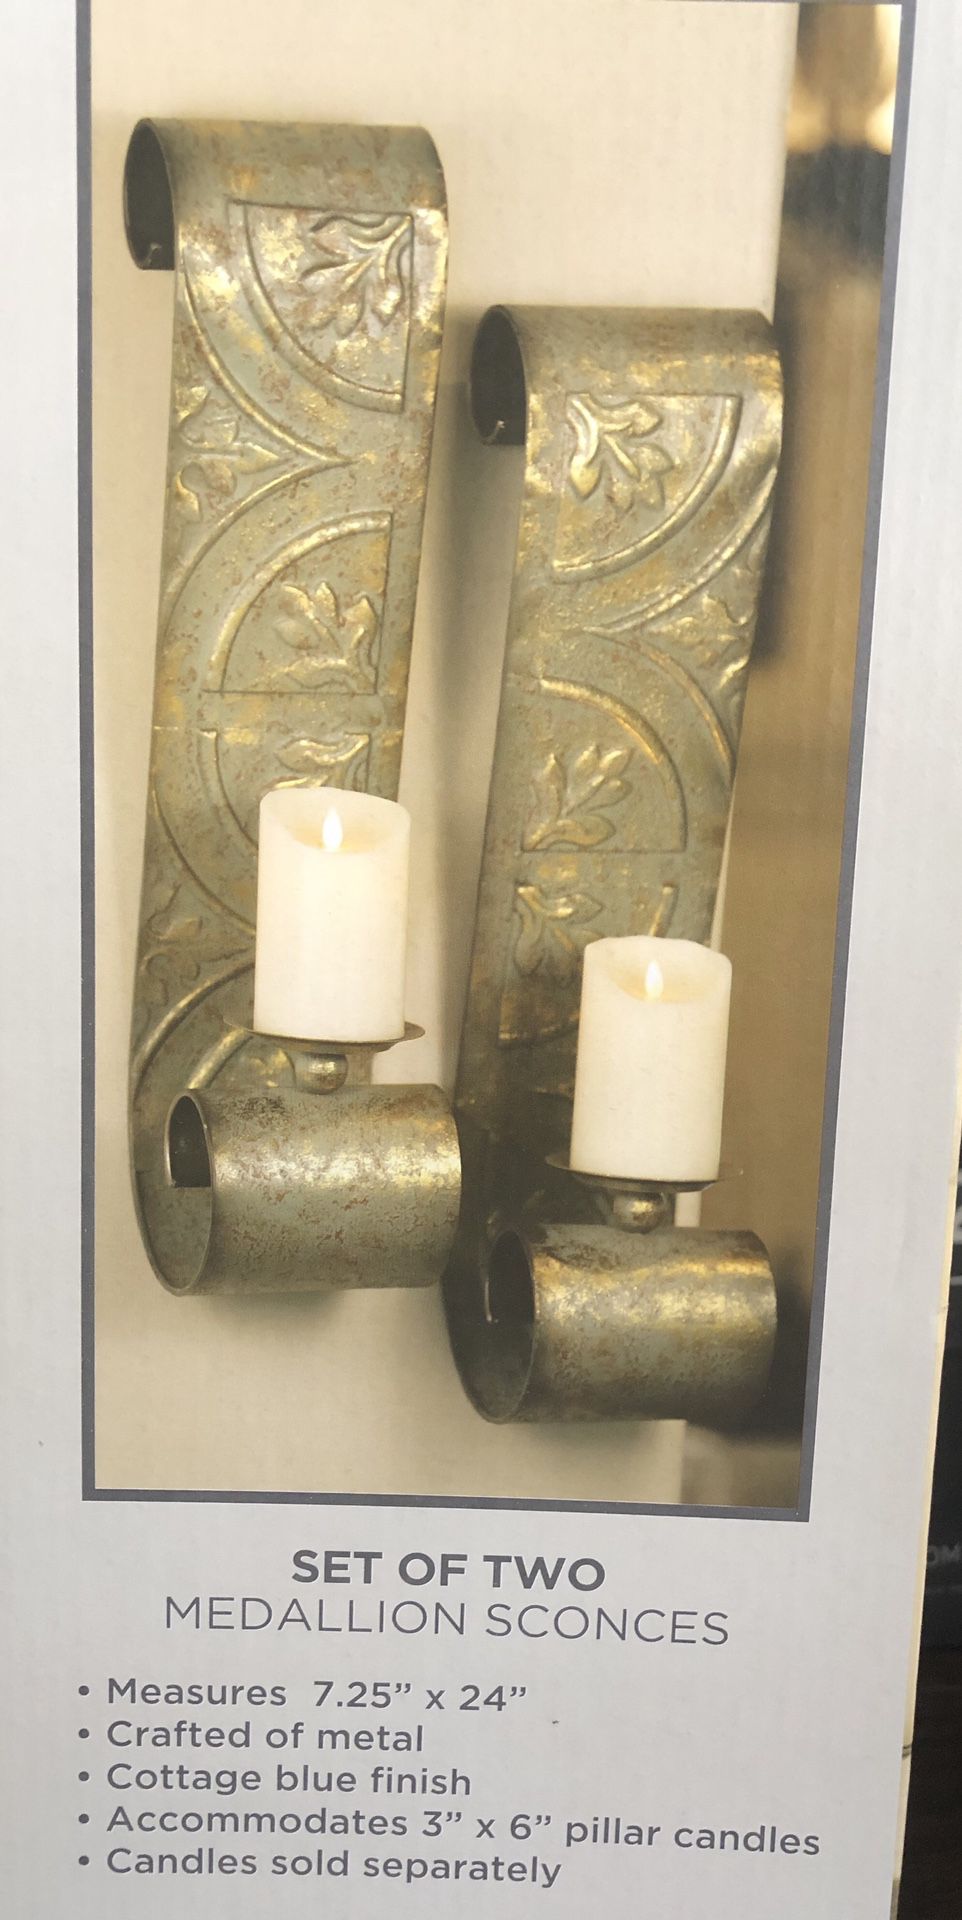 Set of two medallion sconces( Candle holders)